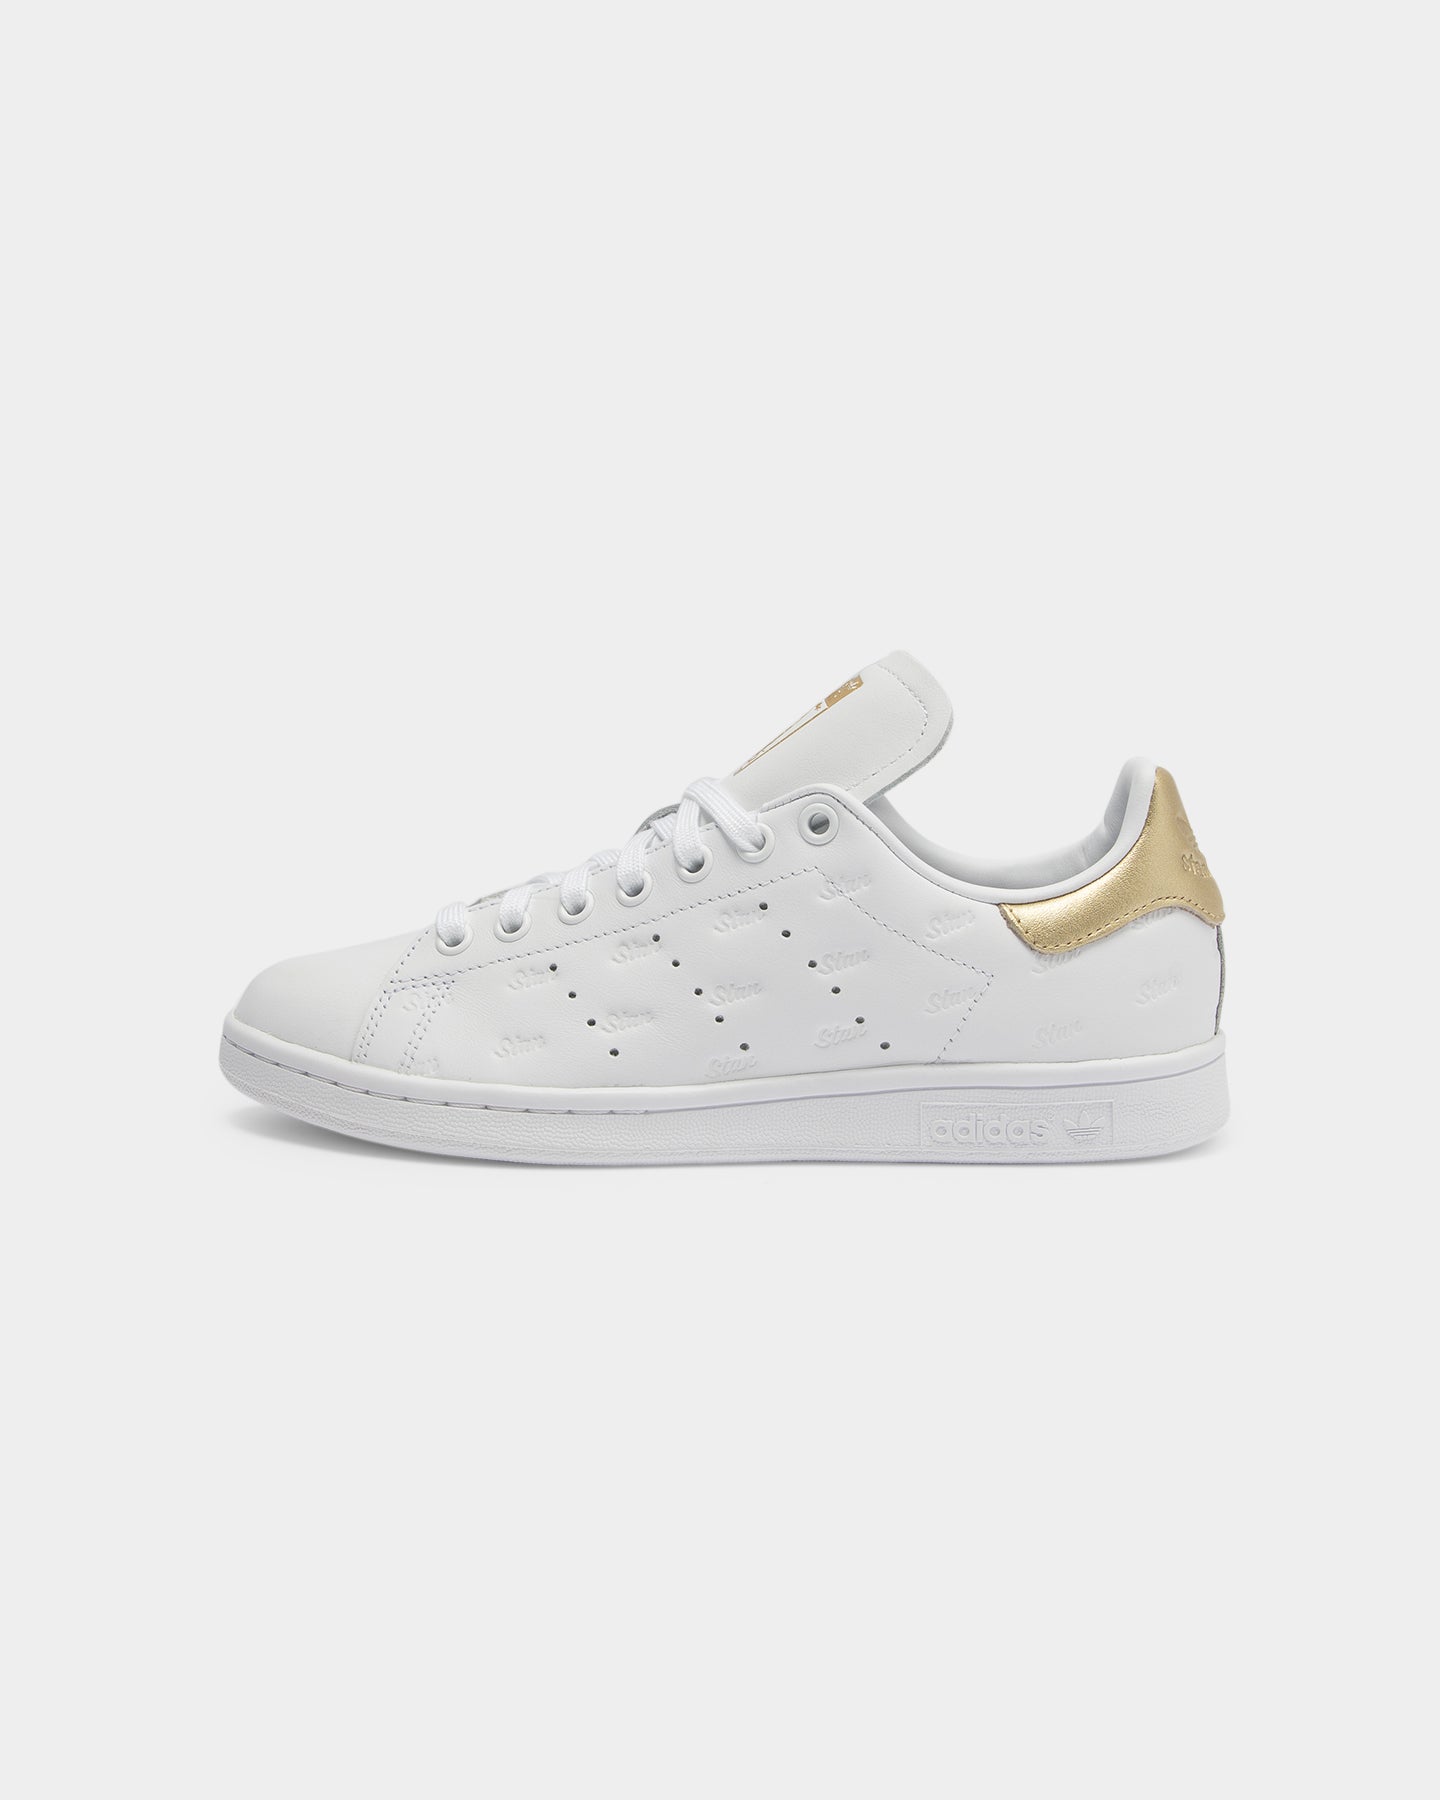 white and gold stan smith womens